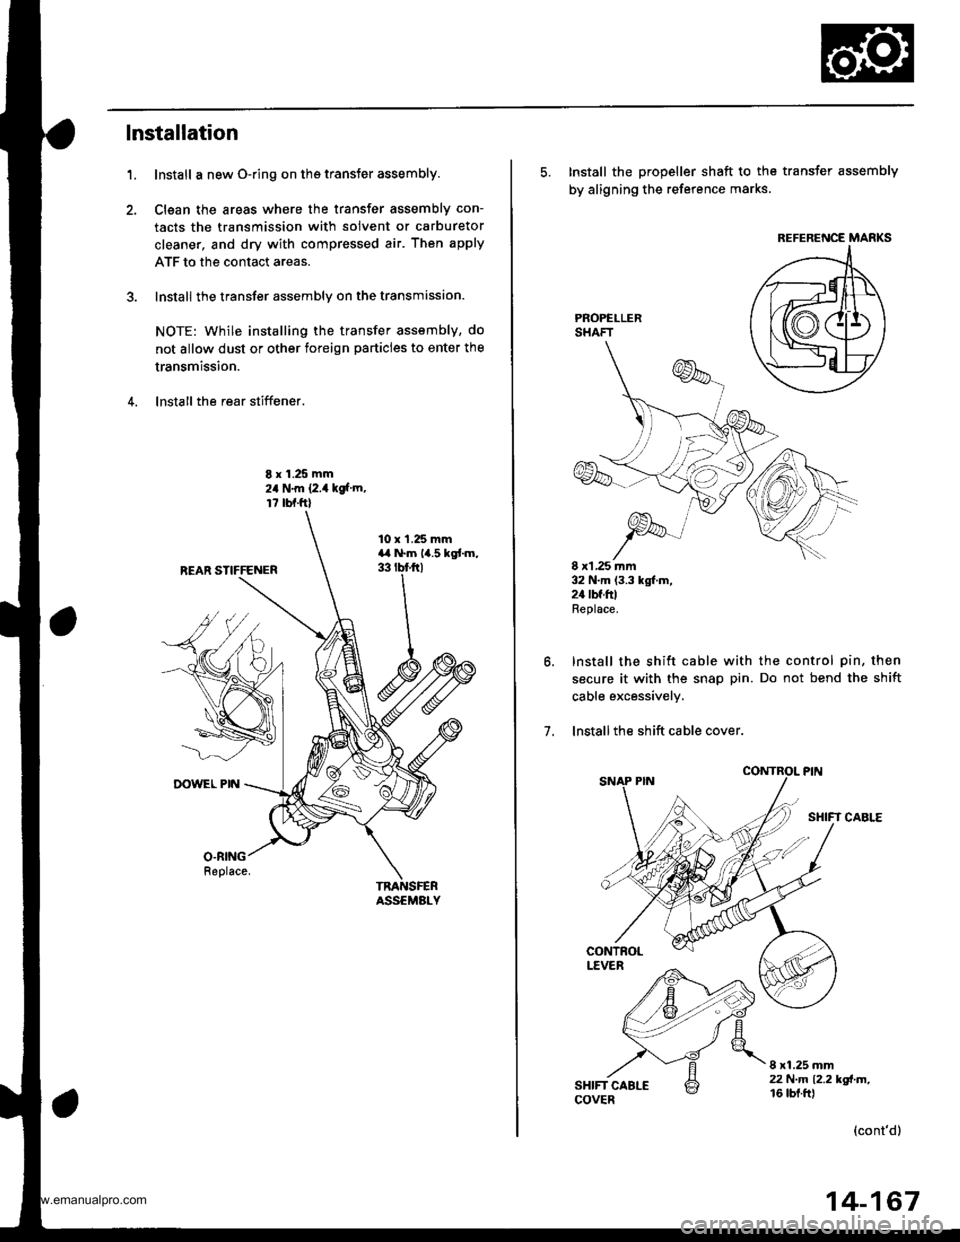 HONDA CR-V 2000 RD1-RD3 / 1.G Manual Online 
lnstallation
Install a new O-ring on ths transfer assembly.
Clsan the areas where the transfer assembly con-
tacts the transmission with solvent or carburetor
cleaner, and dry with compressed air. Th